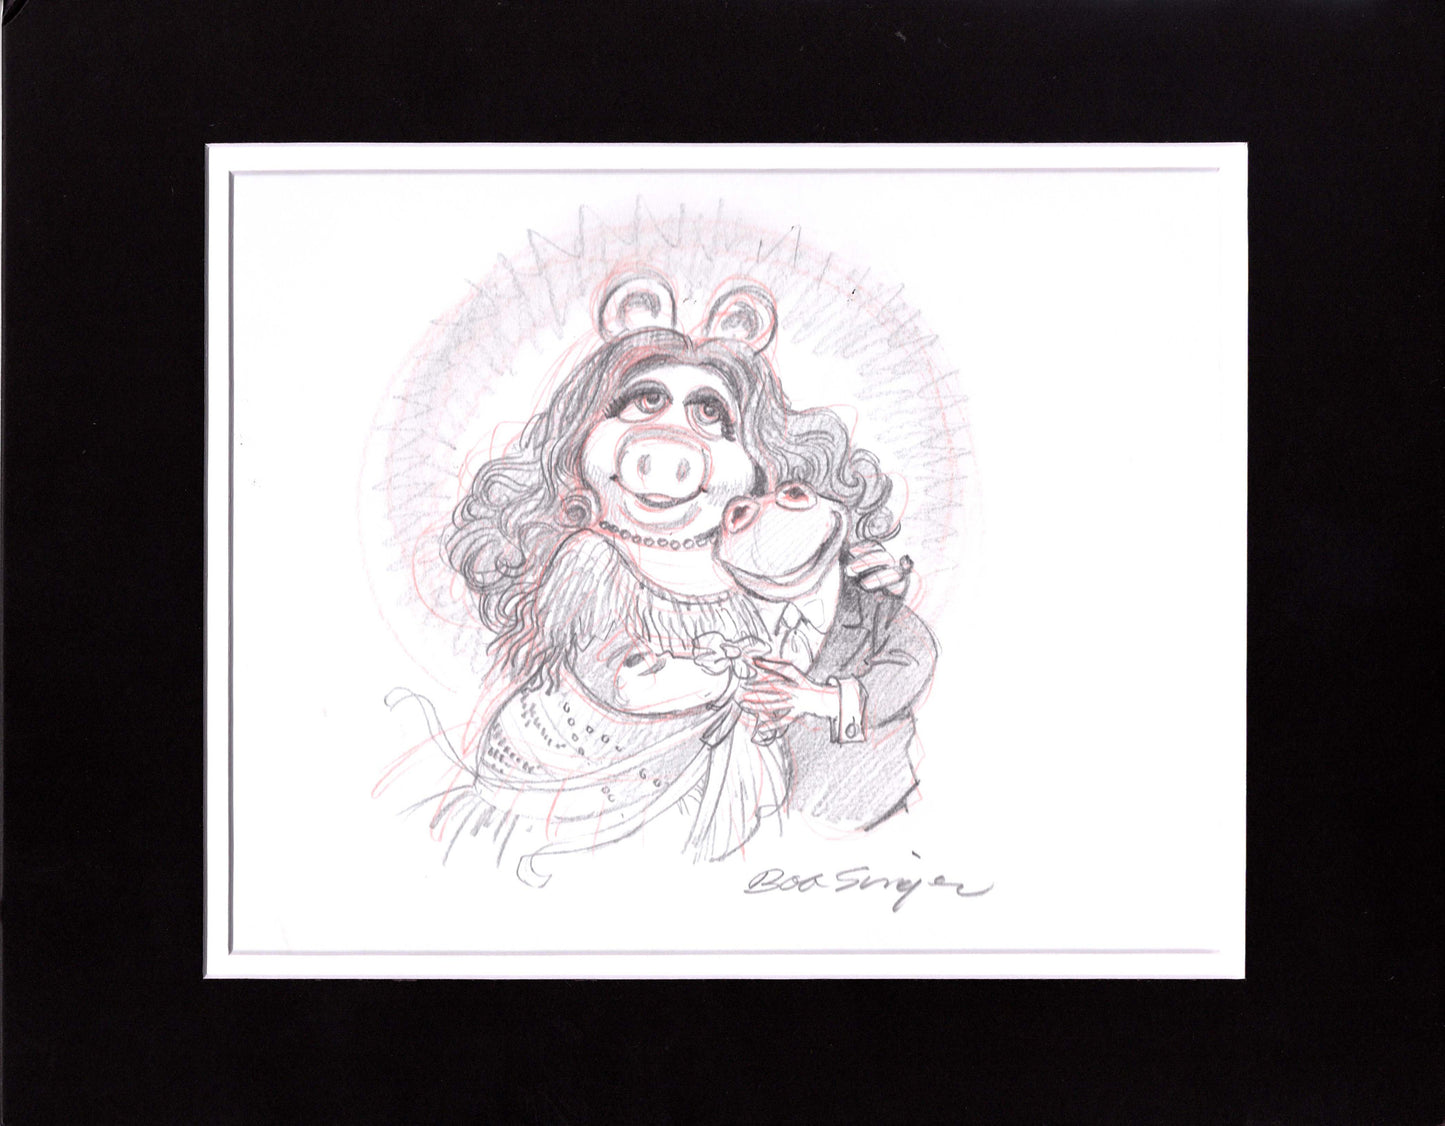 The Muppets Kermit the Frog and Miss Piggy Pencil Scene Drawing Signed by Bob Singer